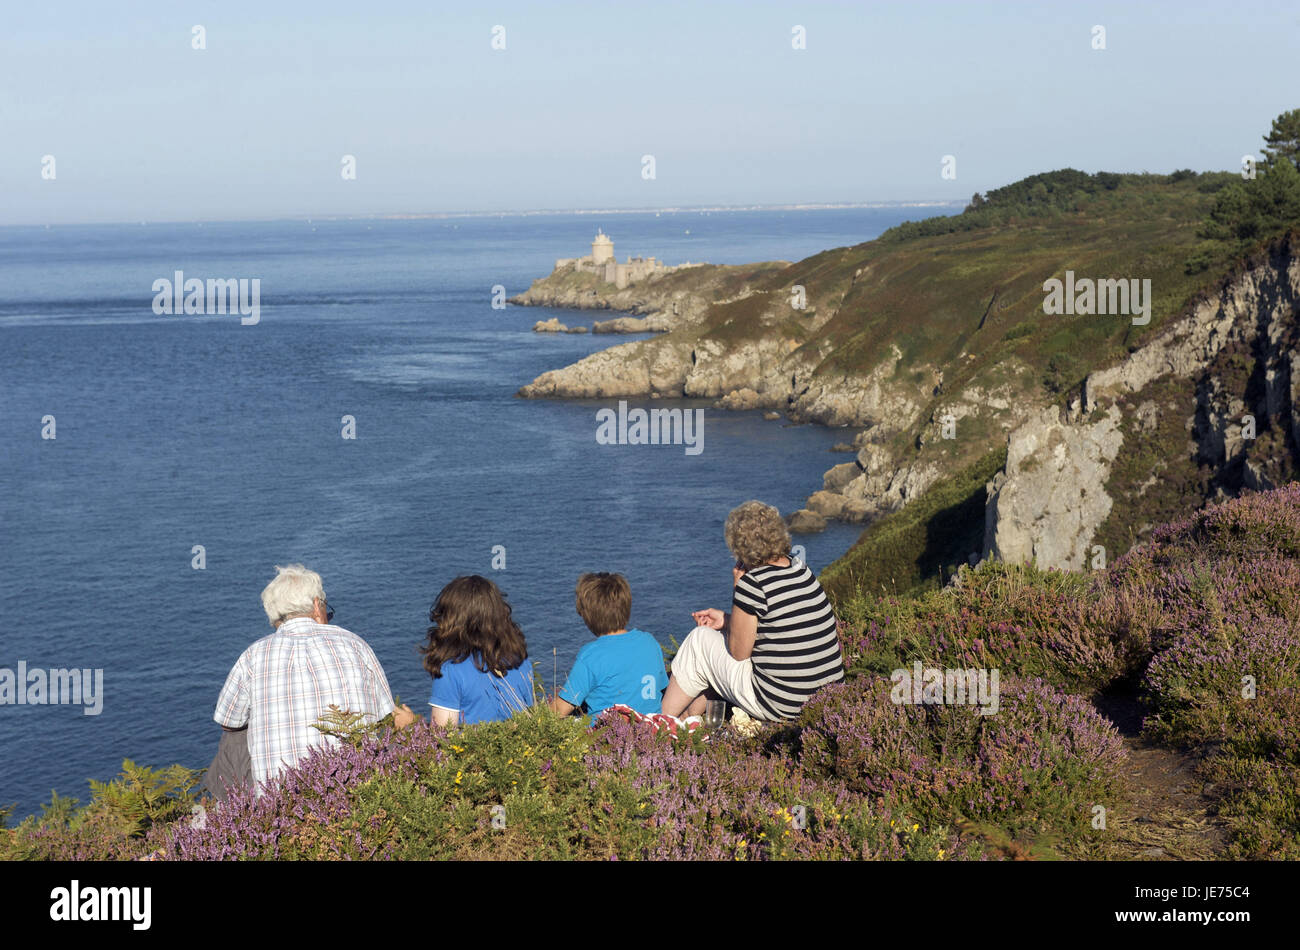 Europe, France, Brittany, Cote D' Emeraude, Cap Frehel, coastal scenery with four people, in the background the castle fort la bar, Stock Photo